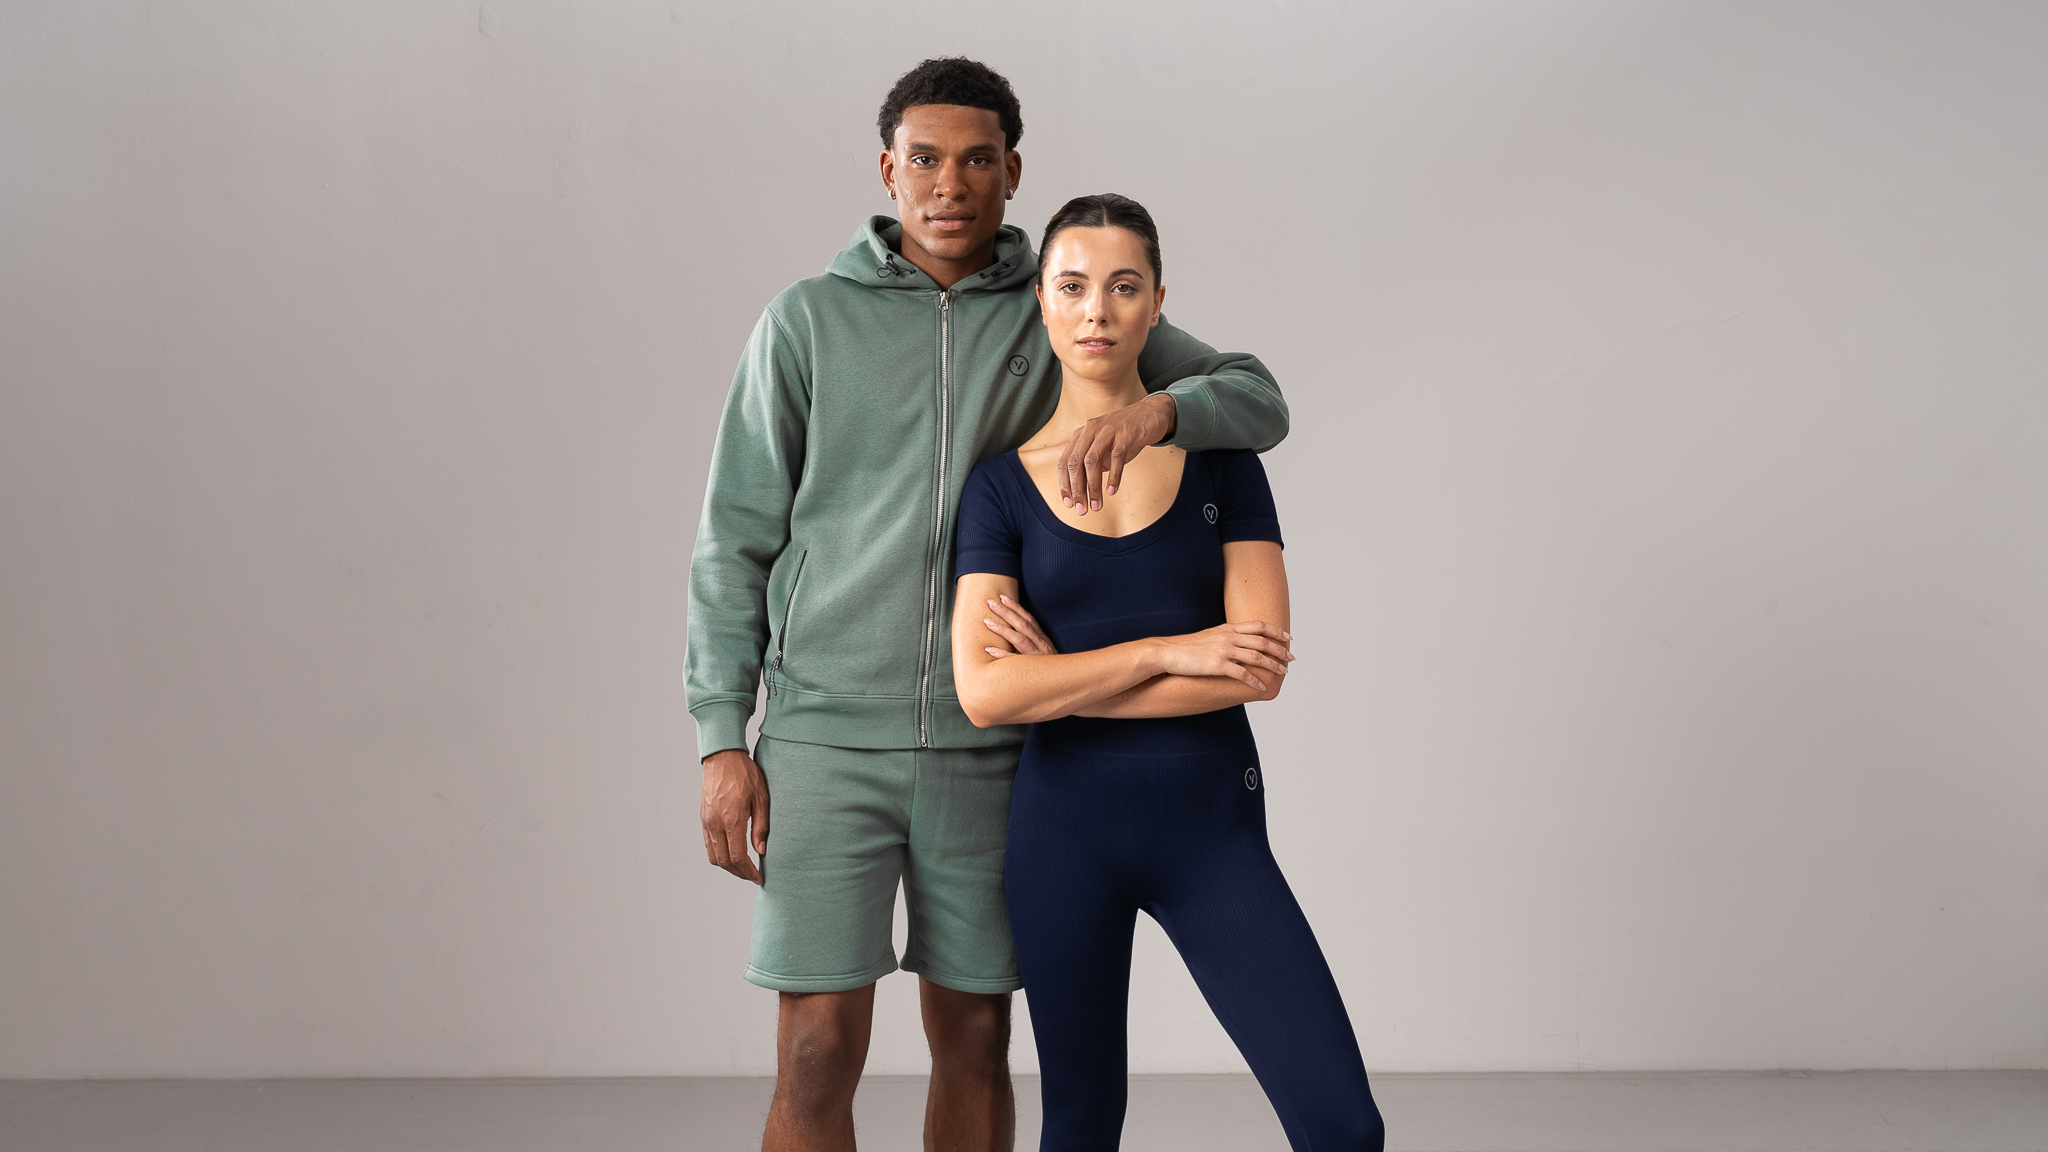 MAN IN GREEN SHORTS AND HOODY WOMAN IN NAVY YOGA SET